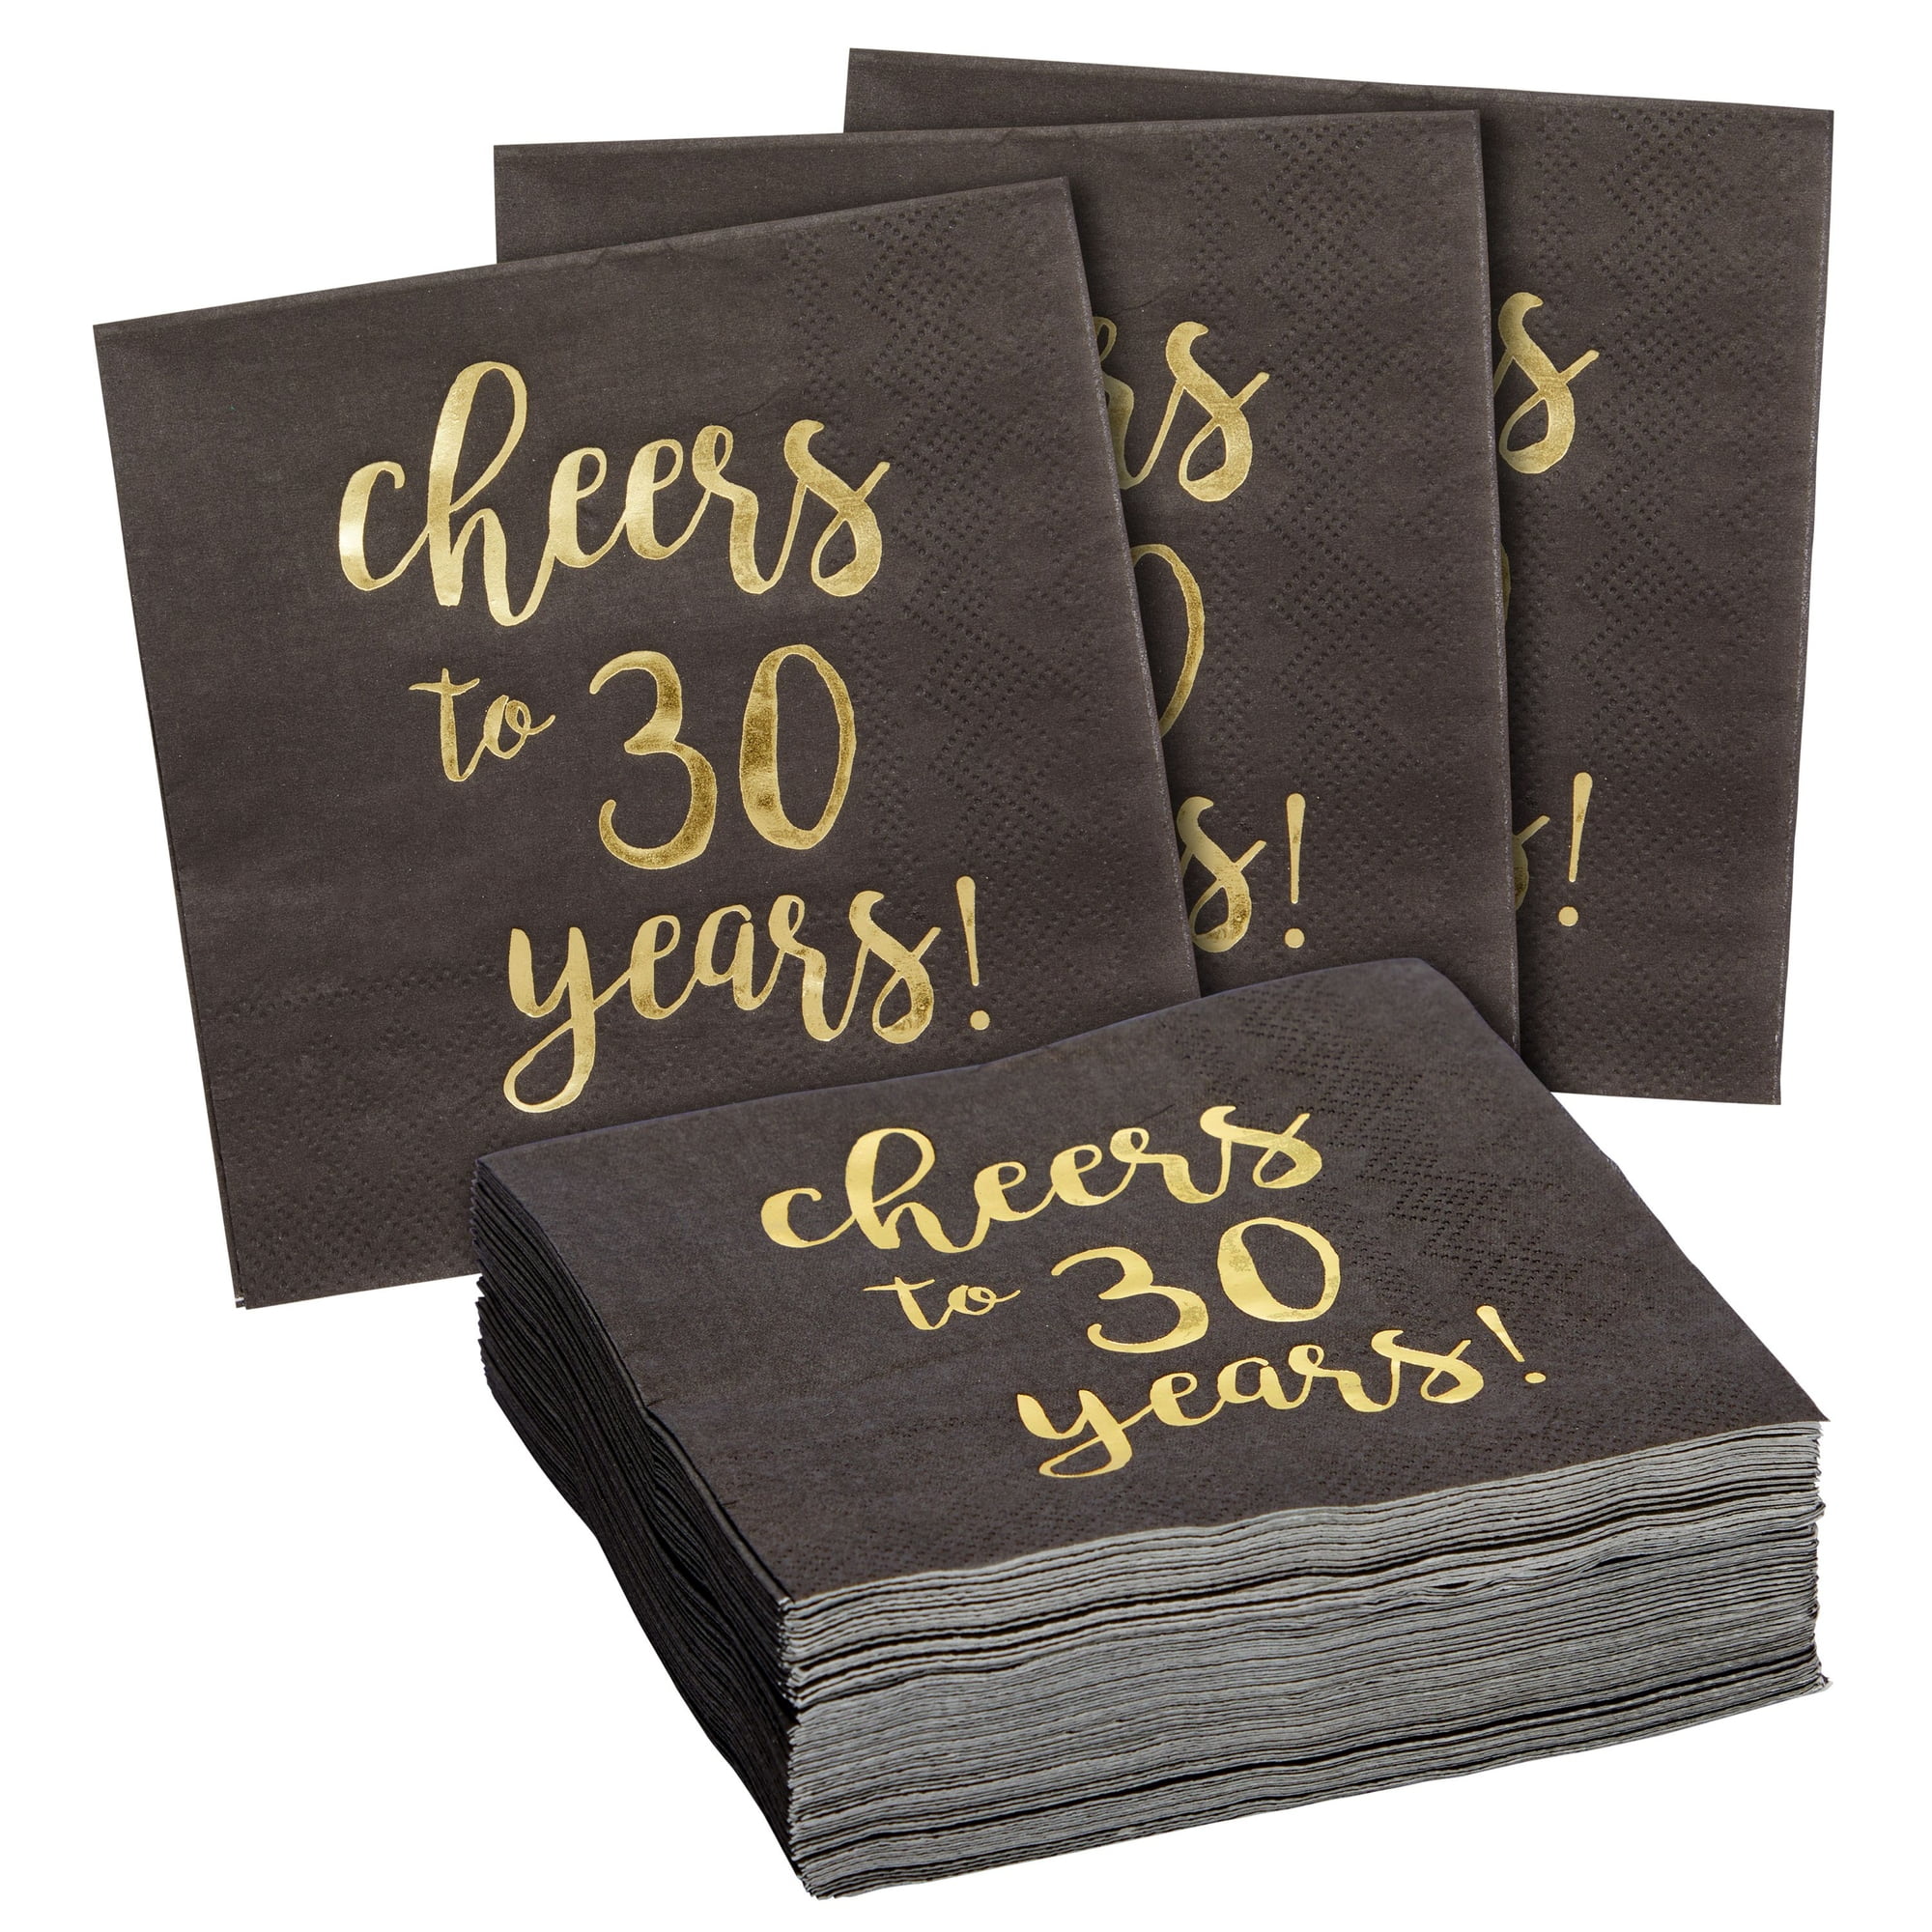 Happy 60th Anniversary, Cheers to 60 Years, 60th Wedding Anniversary, Gold  confetti Anniversary Party Decoration, Anniversary décor, files